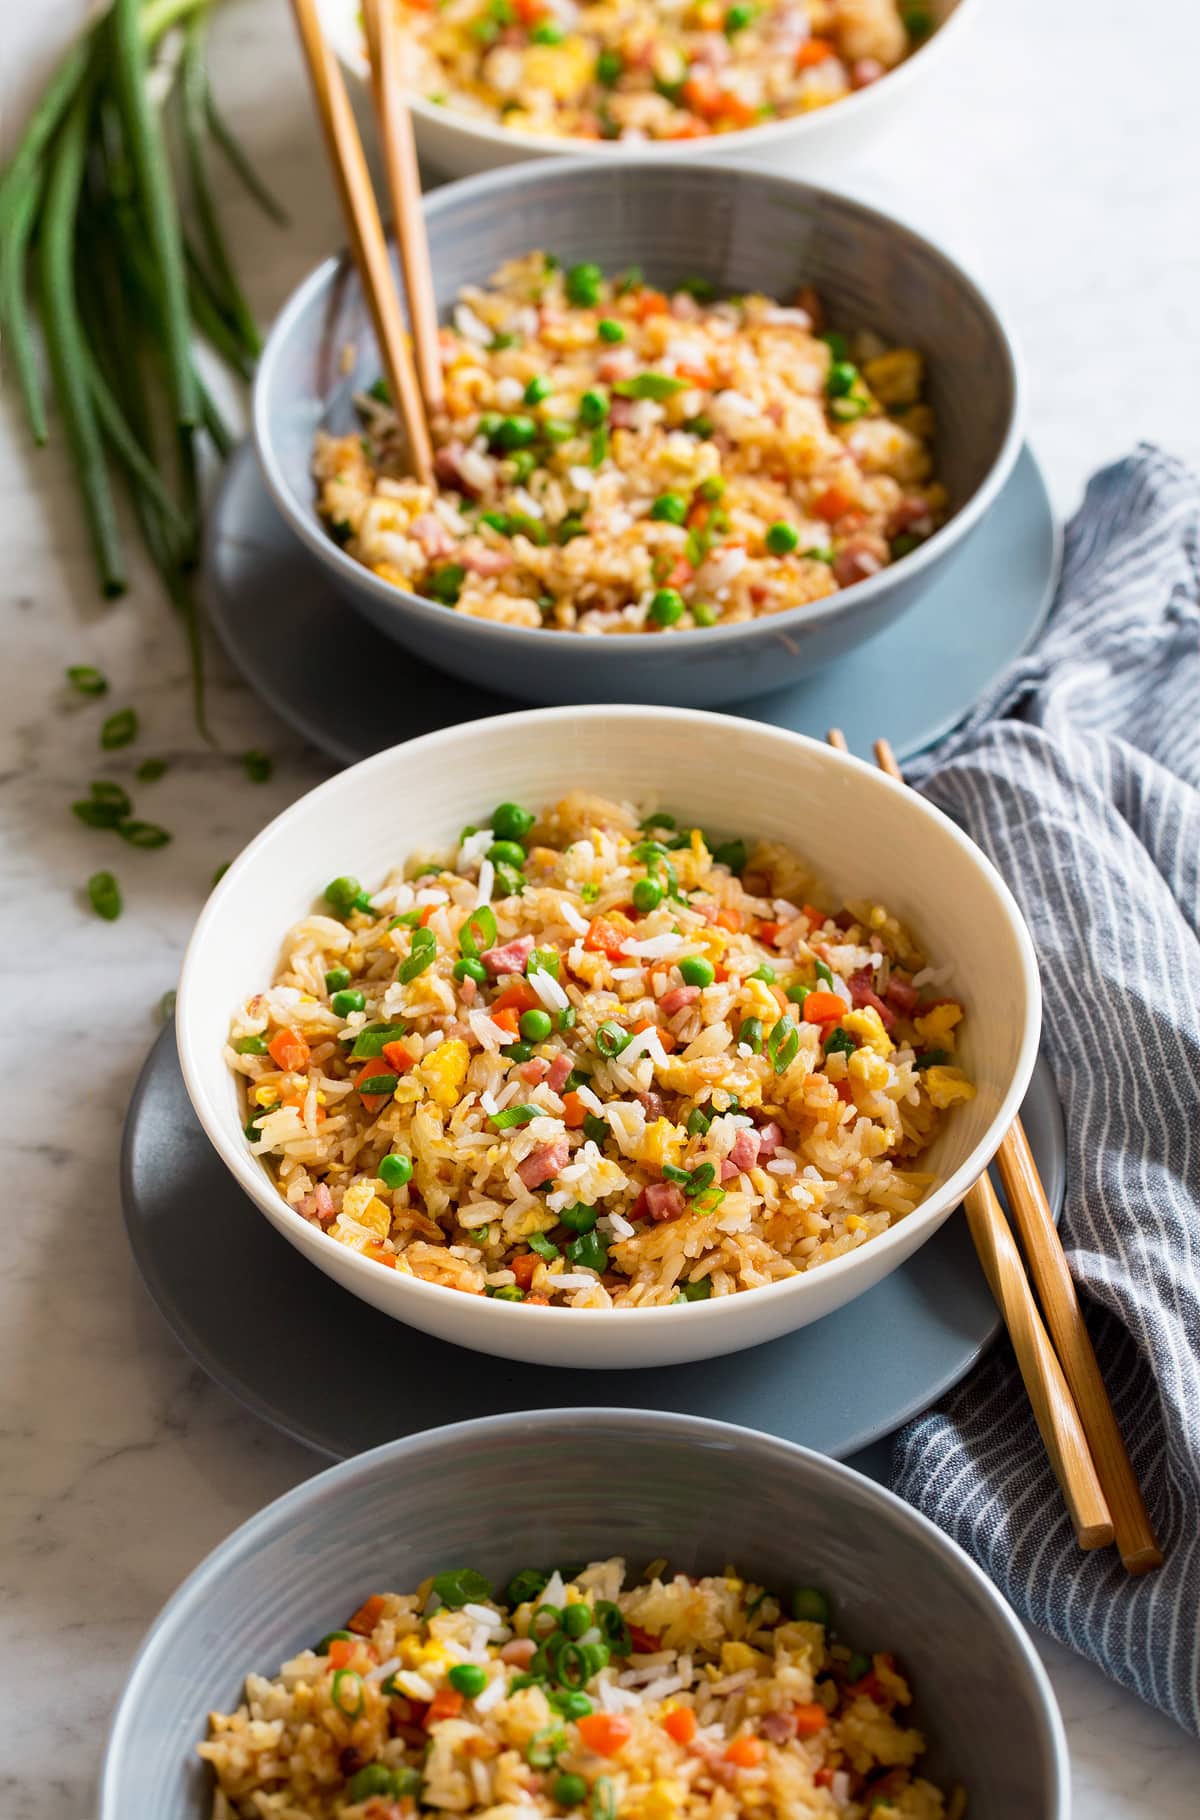 Fried rice shown in four bowls in a row.